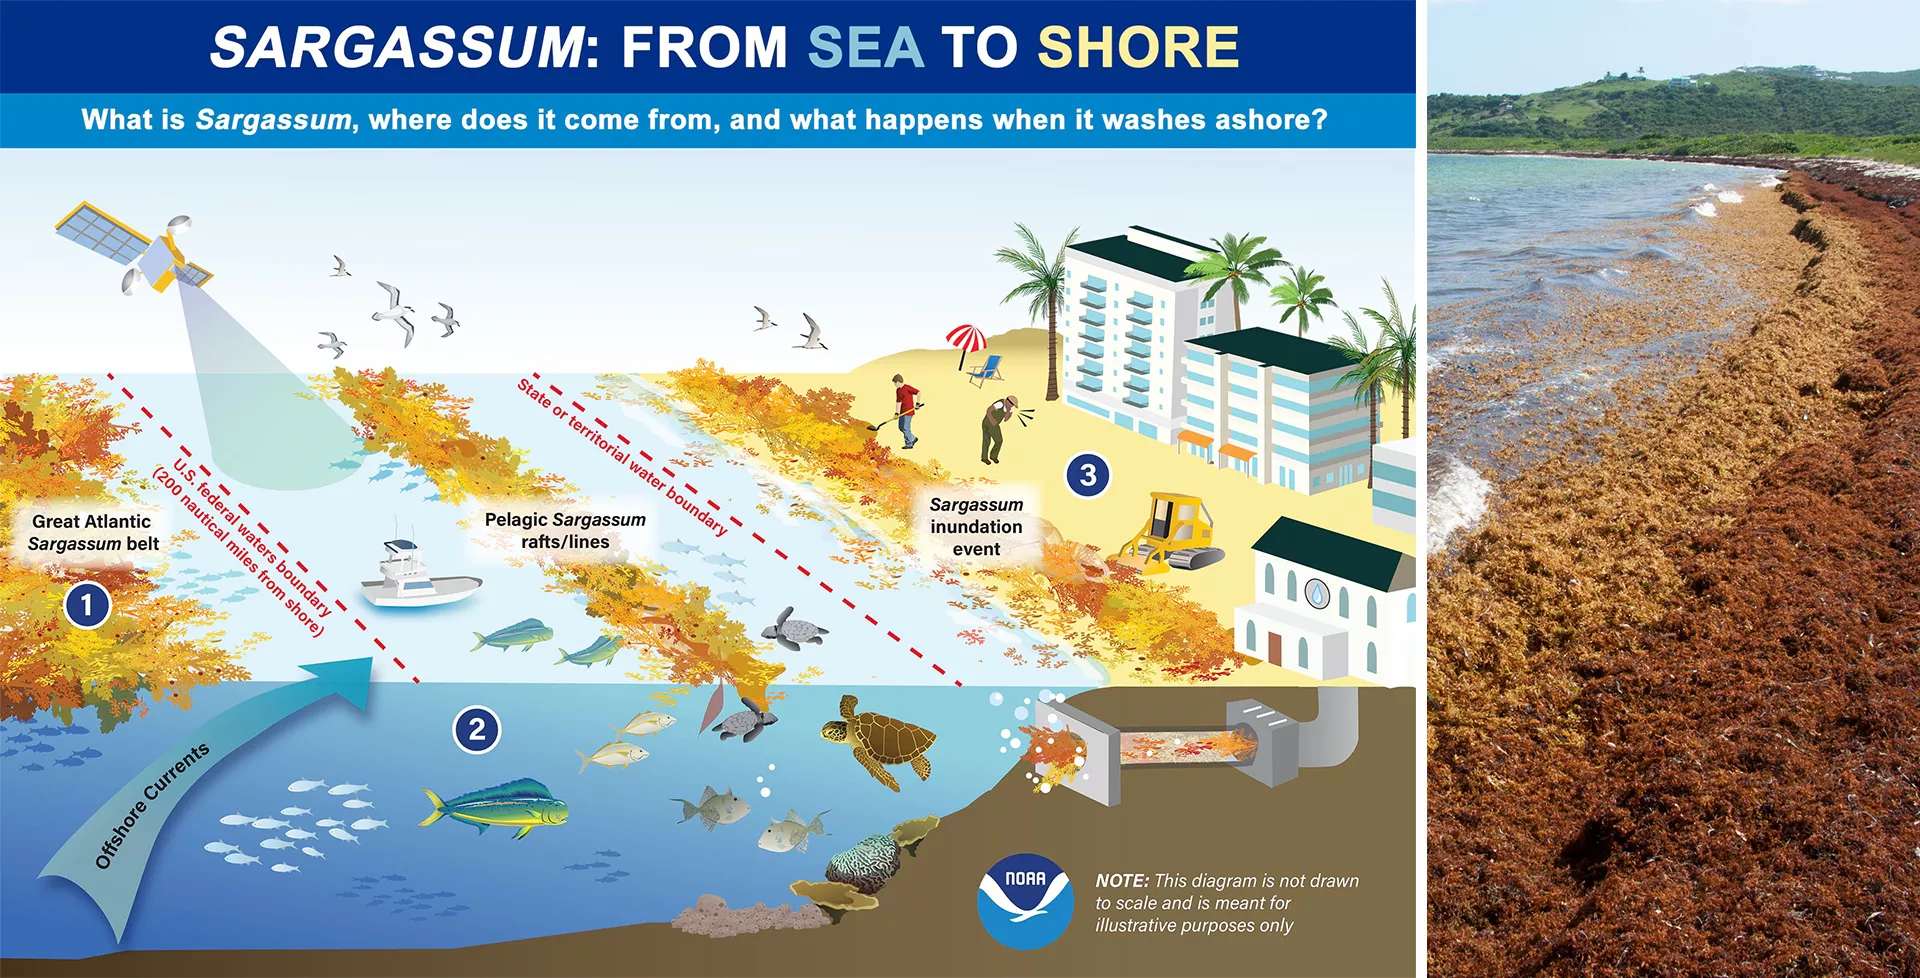 This infographic illustrates the movement of Sargassum from sea to shore. Out at sea, Sargassum provides important fish and wildlife habitat. However, this free-floating algae often washes ashore in great quantities due to strong wind and water currents. Masses of this algae beaching on shore can harm coastal ecosystems, drive away tourists, and pose public health threats. NOAA is working to help coastal communities address the growing problem of what experts call "Sargassum inundation events." This infog